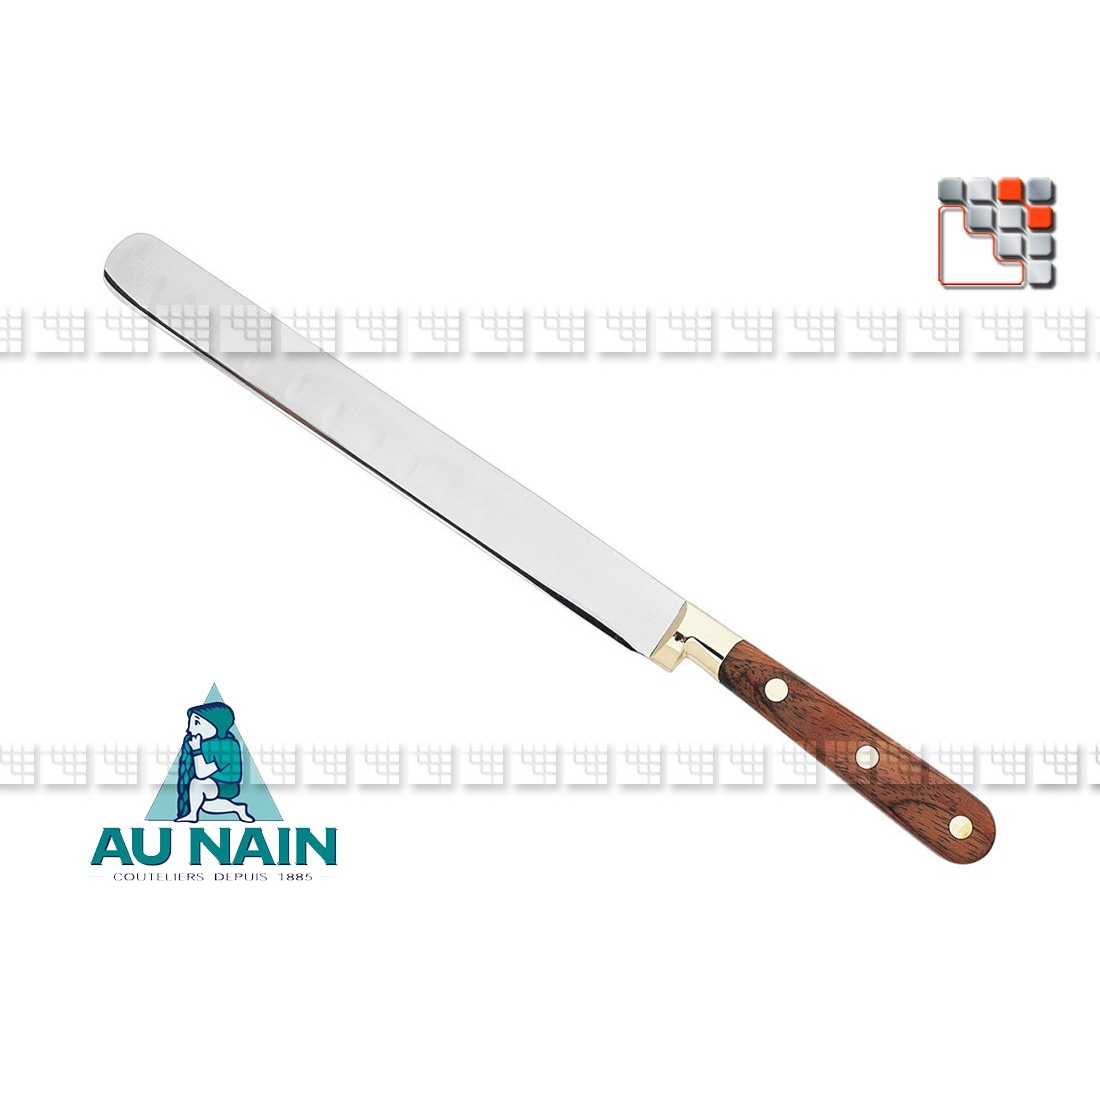 Honeycomb Ham Knife Rosewood 25 AUNAIN A38-1801401 AU NAIN® Coutellerie & Cutting